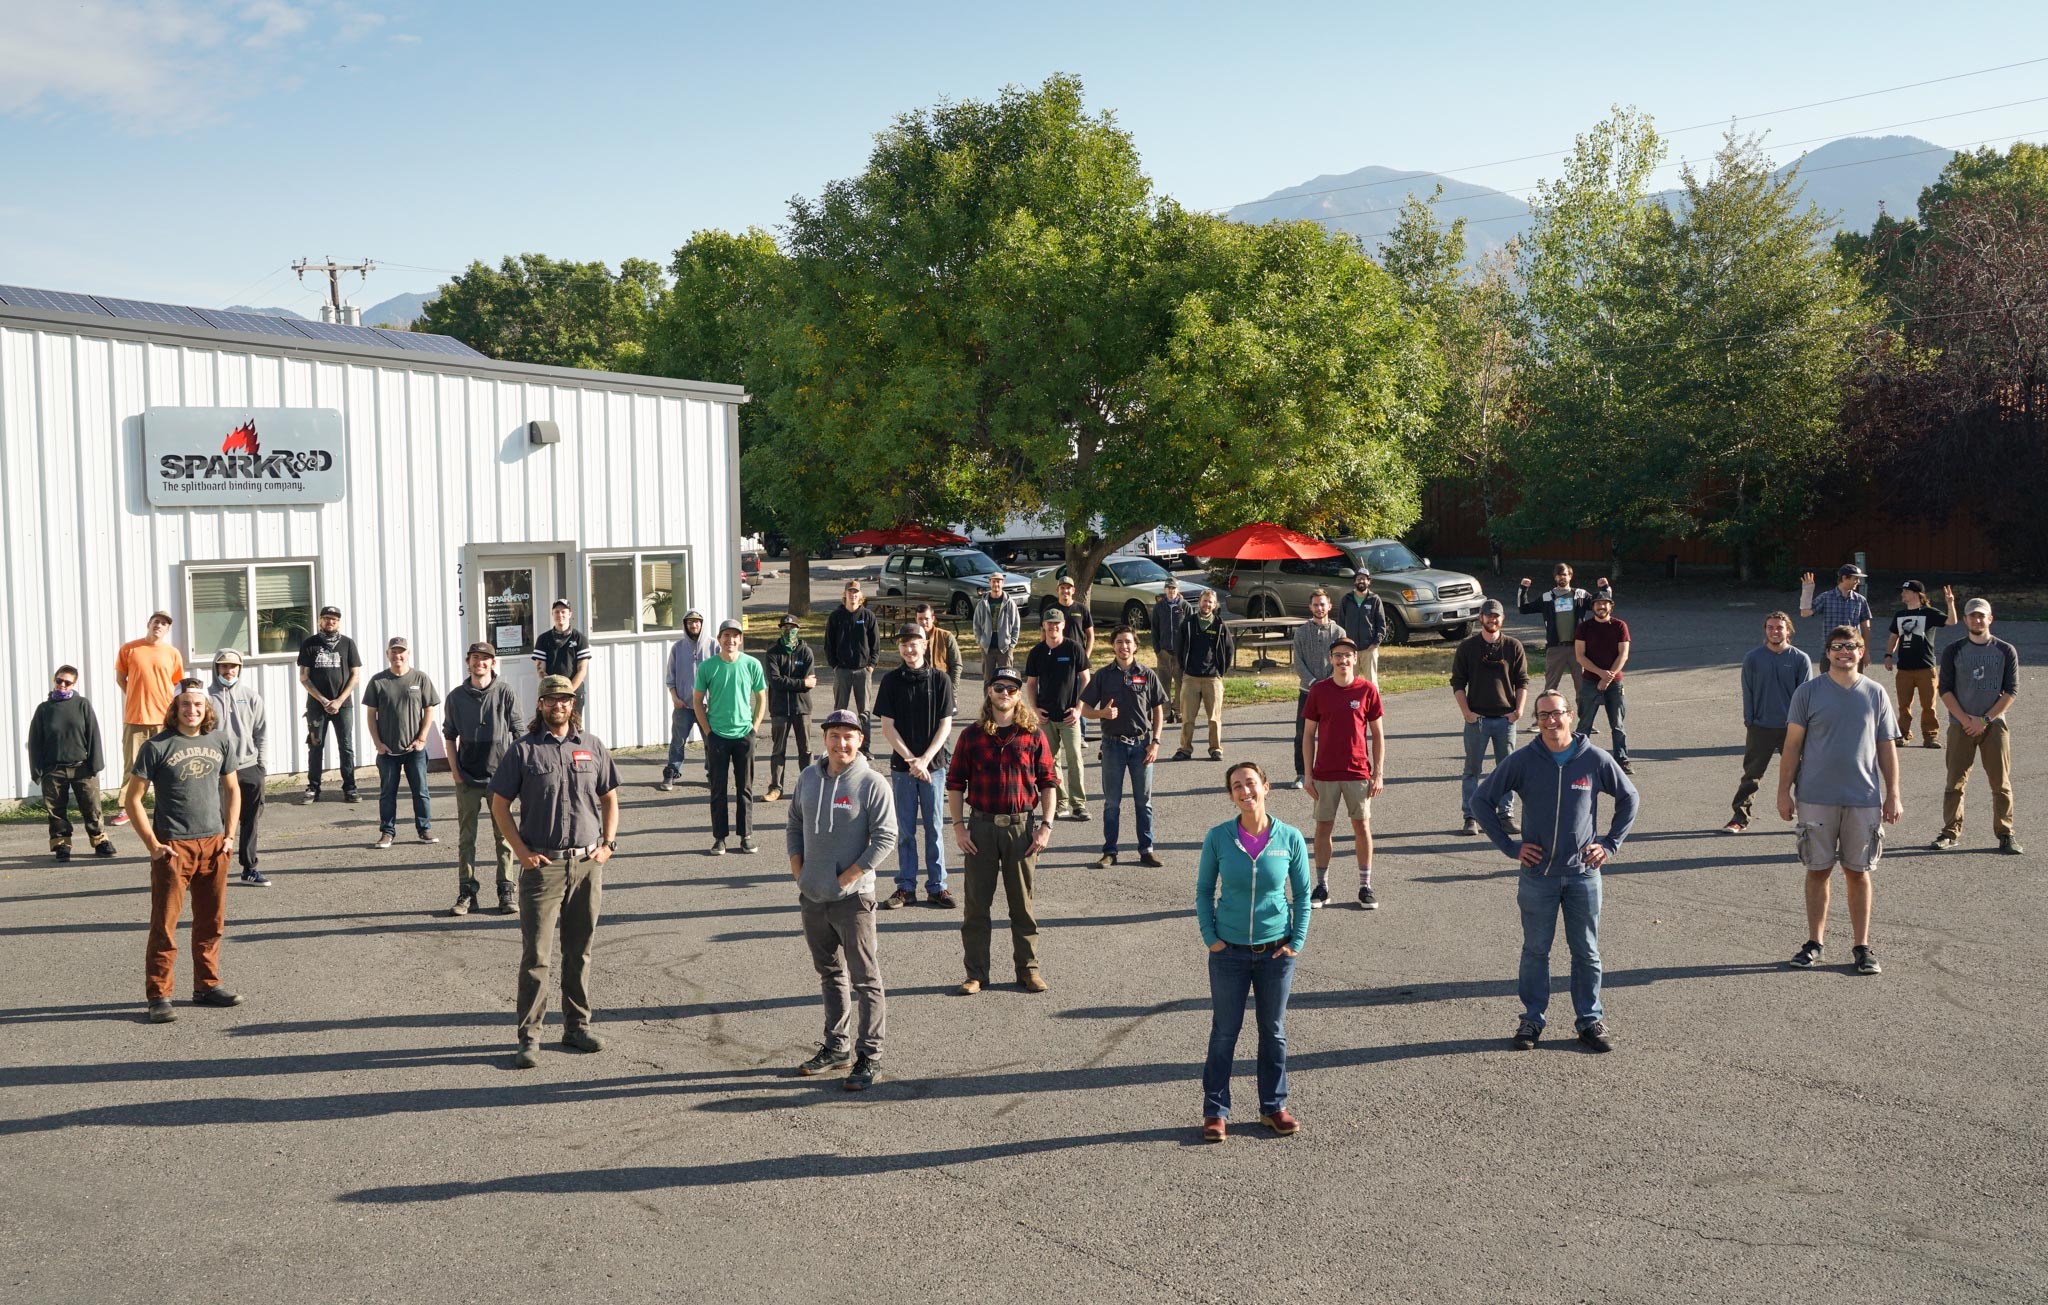 Spark R&D employees in parking lot